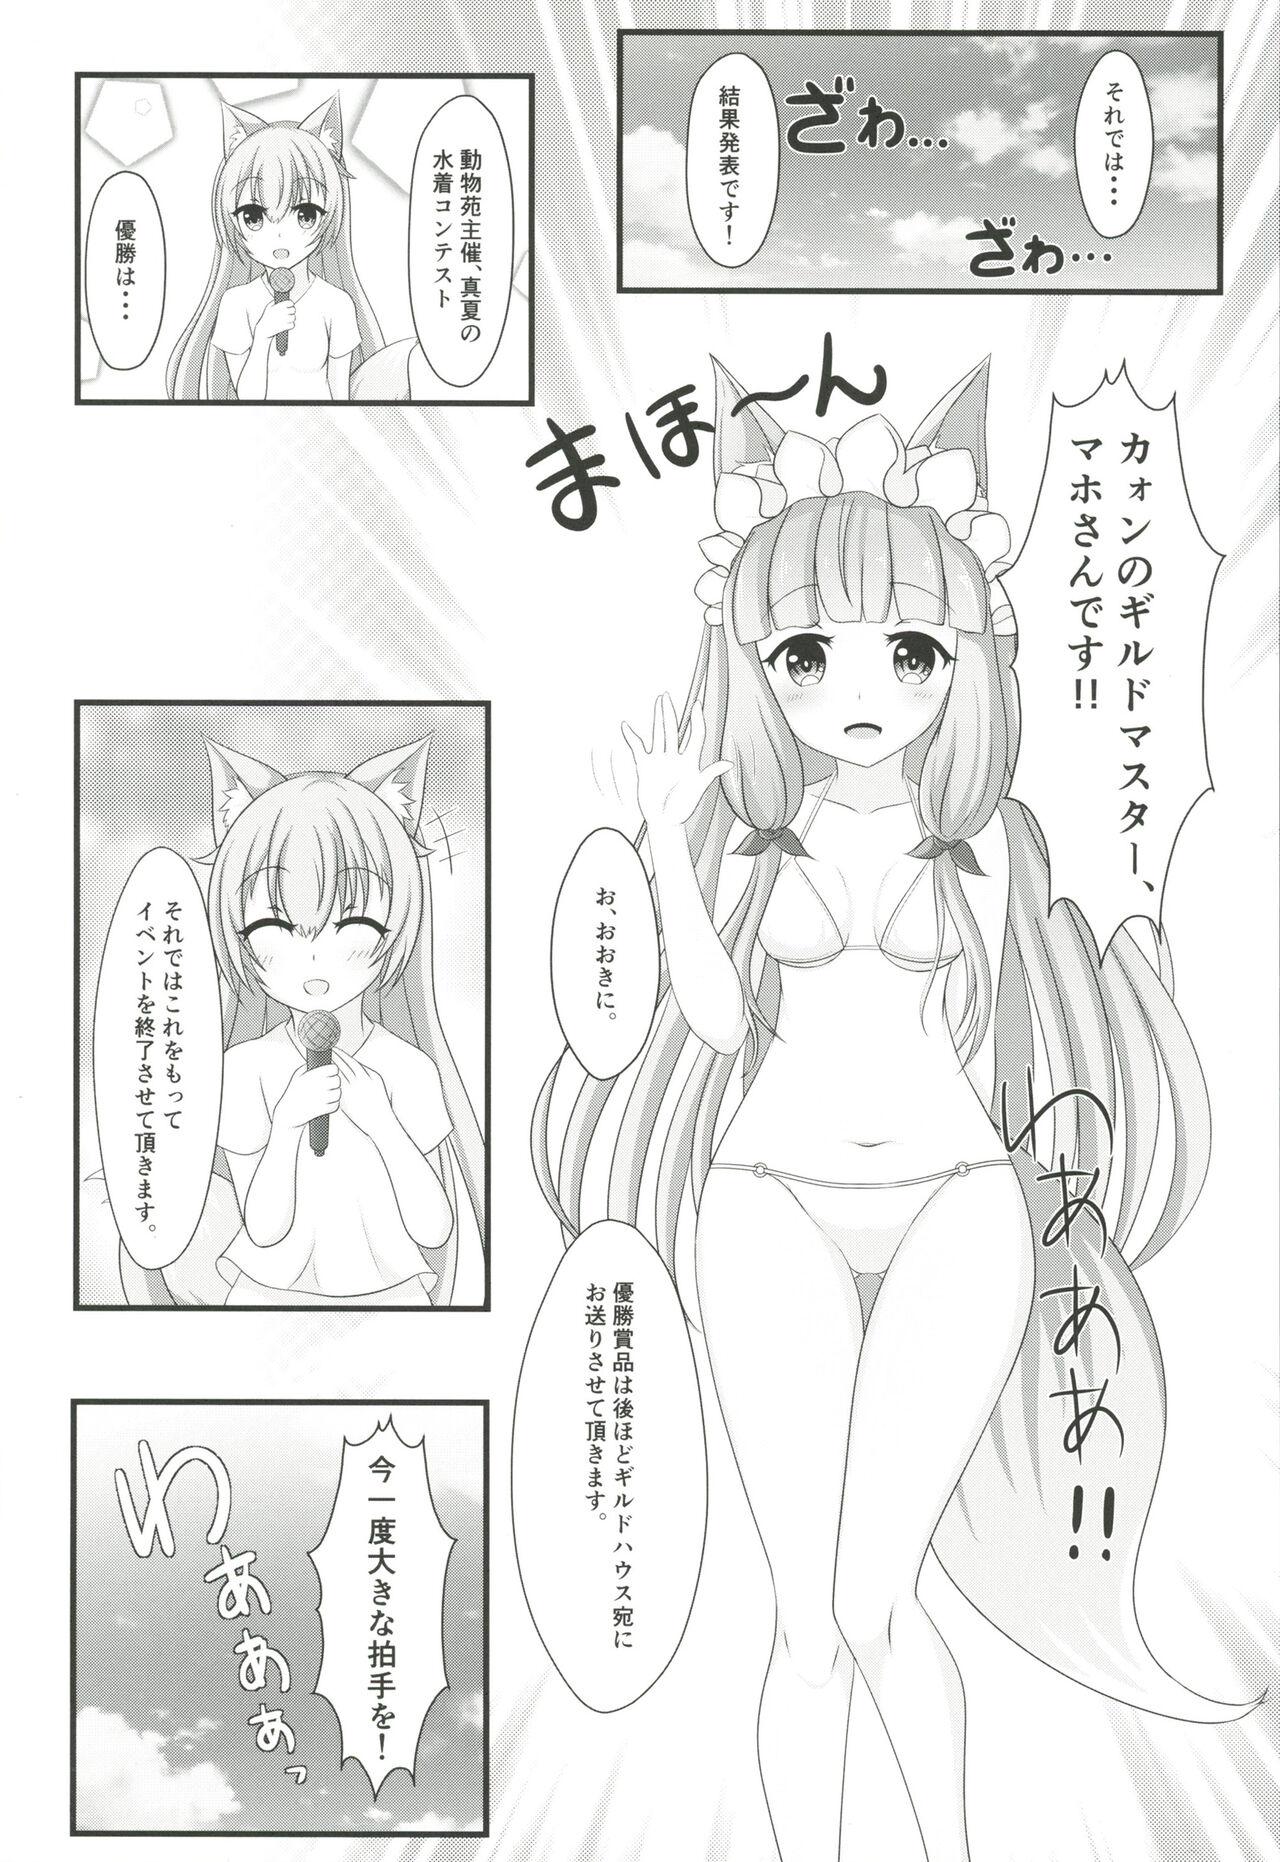 Holes Maho Hime Connect! 2 - Princess connect Oil - Page 3